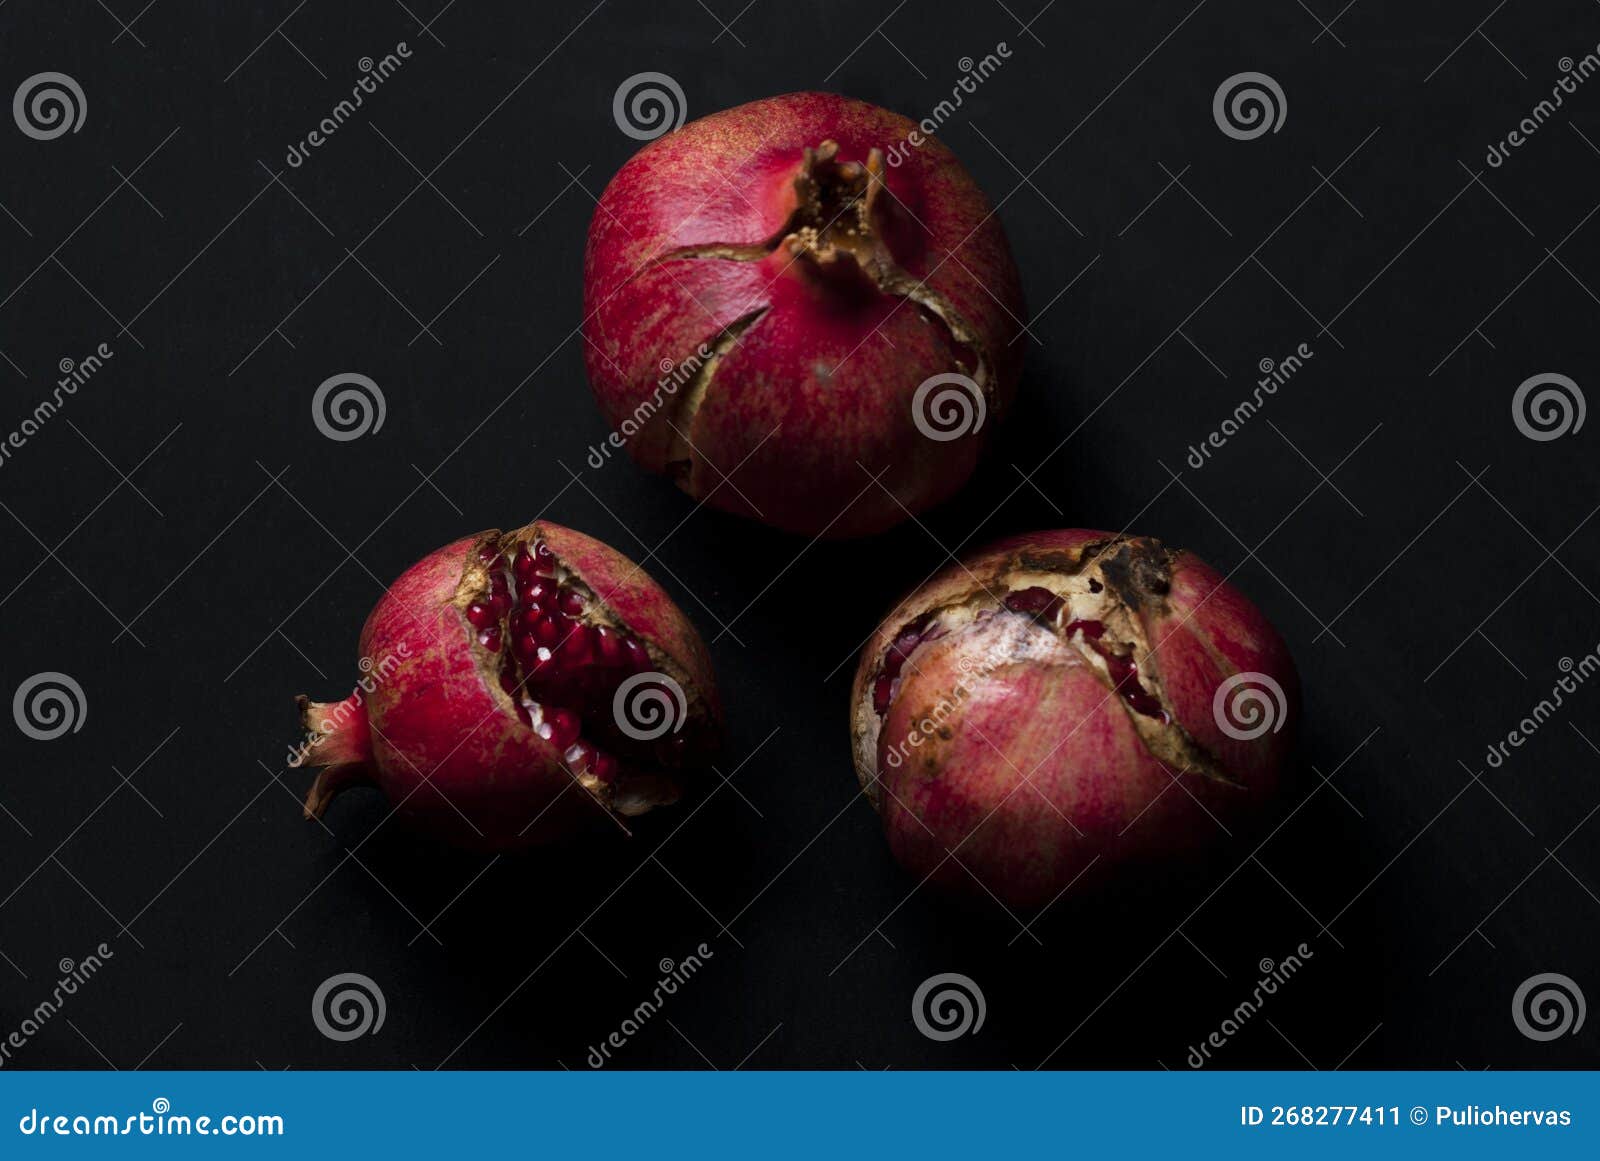 open red ripe pomegranates ready to eat on a black background overhead view